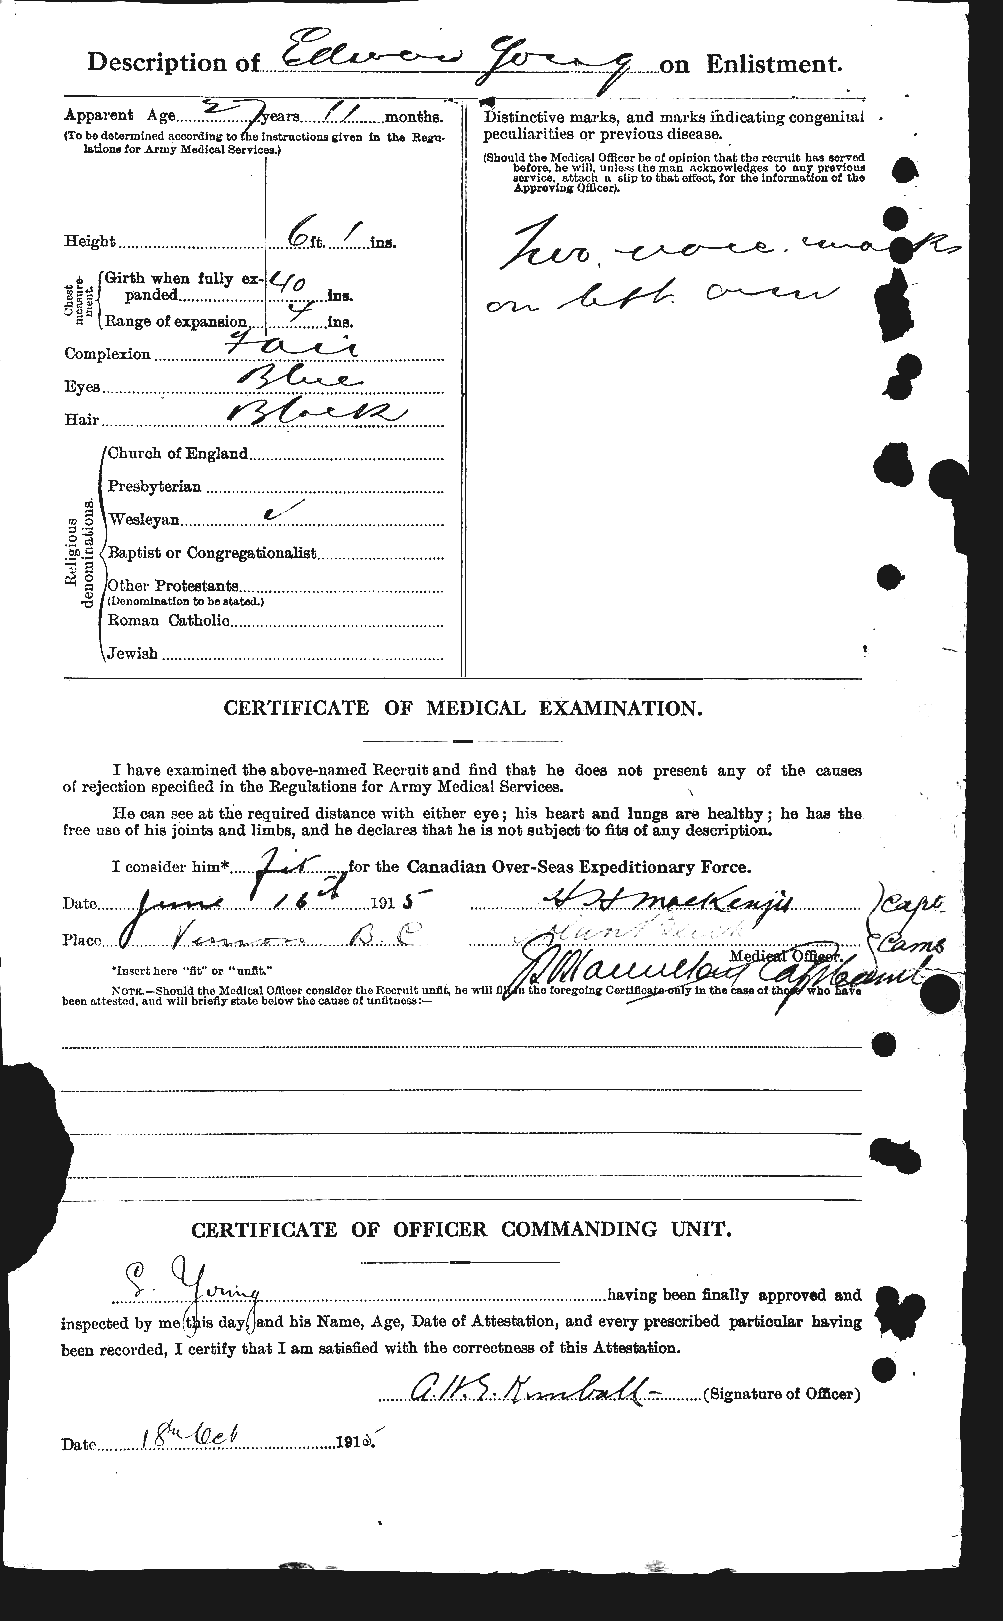 Personnel Records of the First World War - CEF 690233b